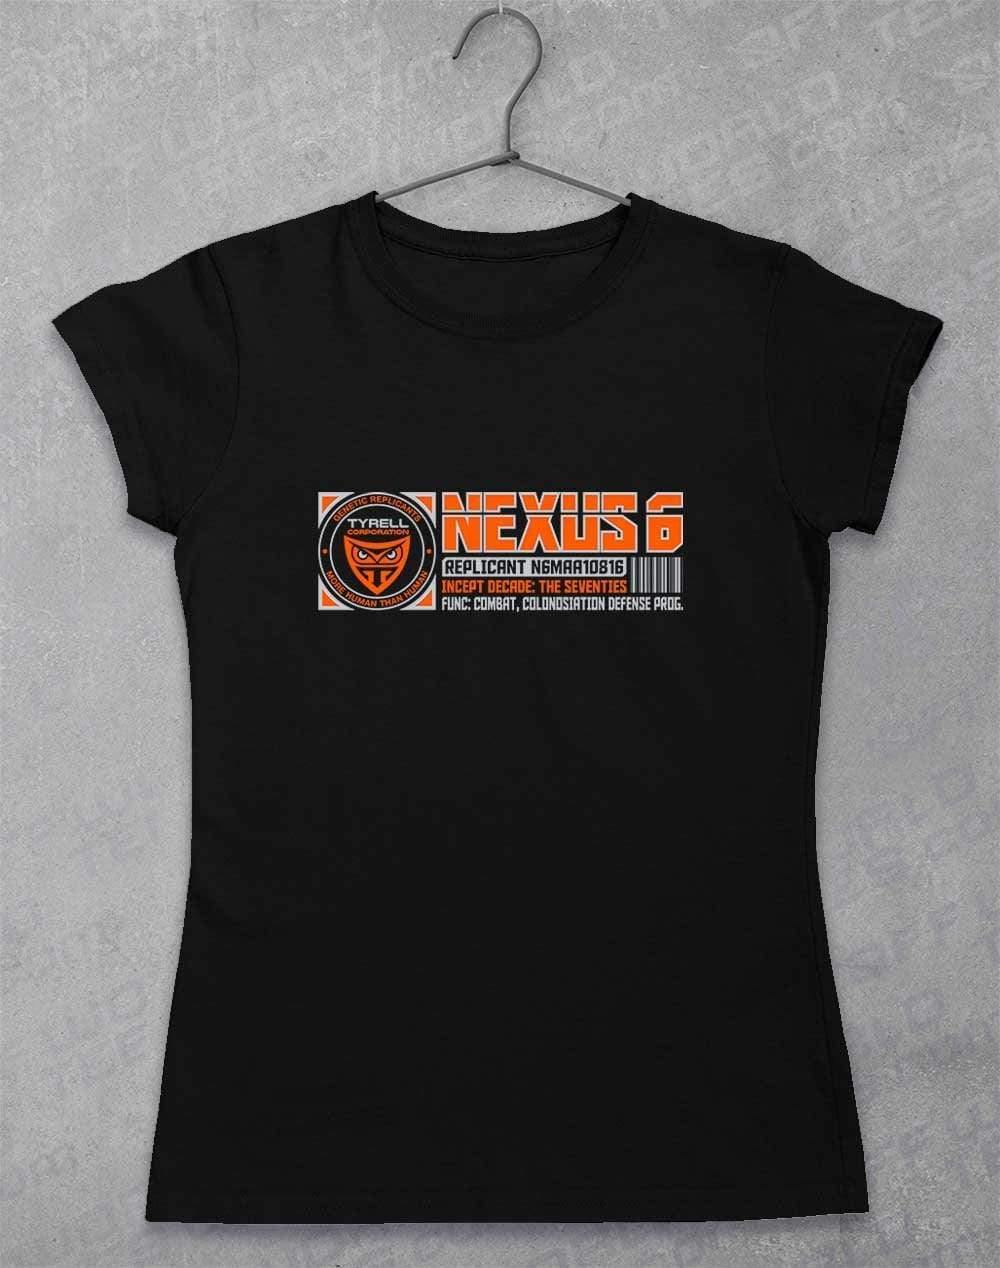 Nexus 6 Replicant Incept Date (CHOOSE YOUR DECADE!) Women's T-Shirt The Seventies - Black / 8-10  - Off World Tees